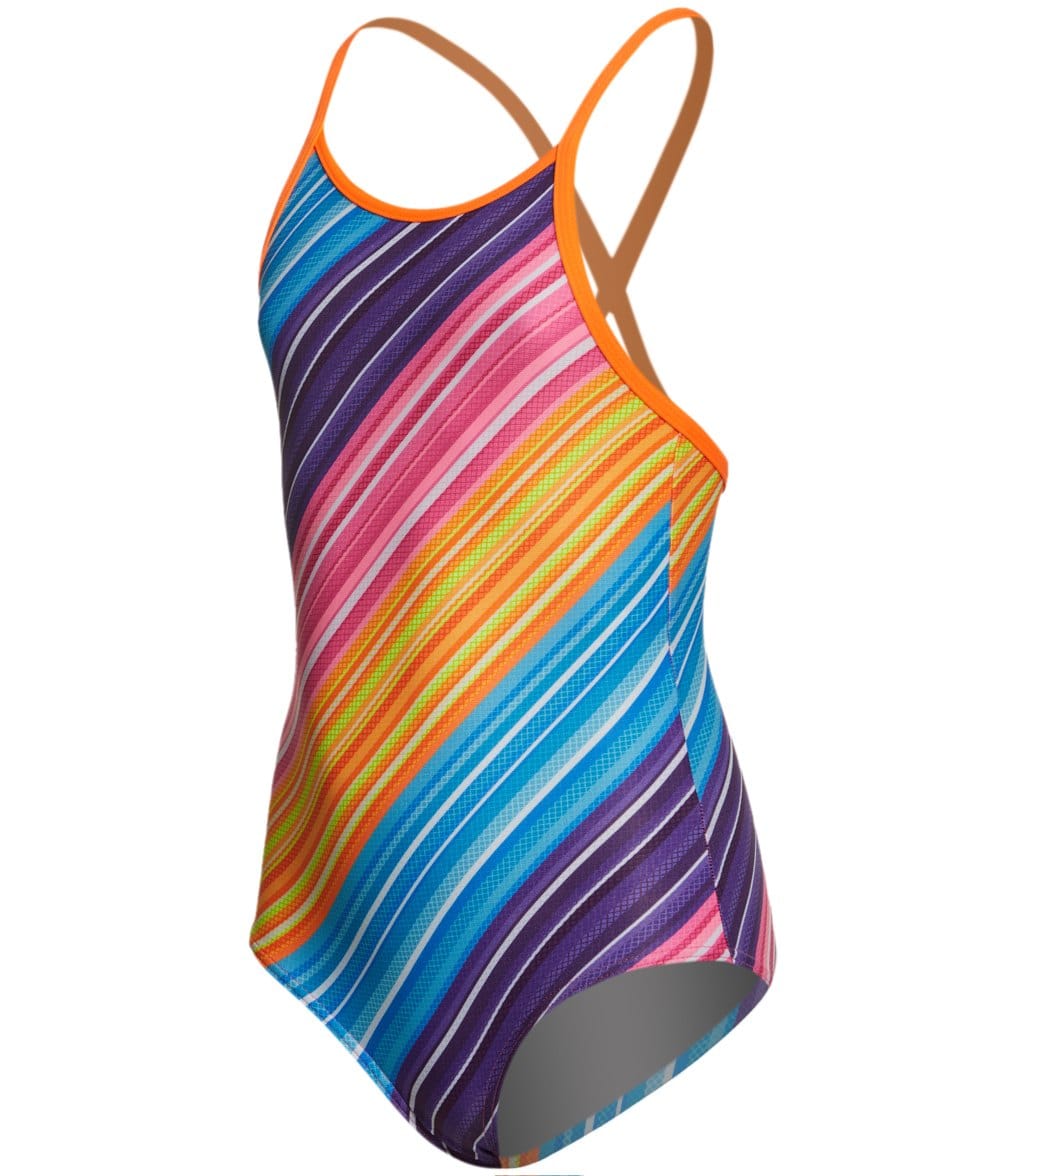 Funkita Toddler Girls' Fine Lines One Piece Swimsuit - Multi 1T Polyester - Swimoutlet.com